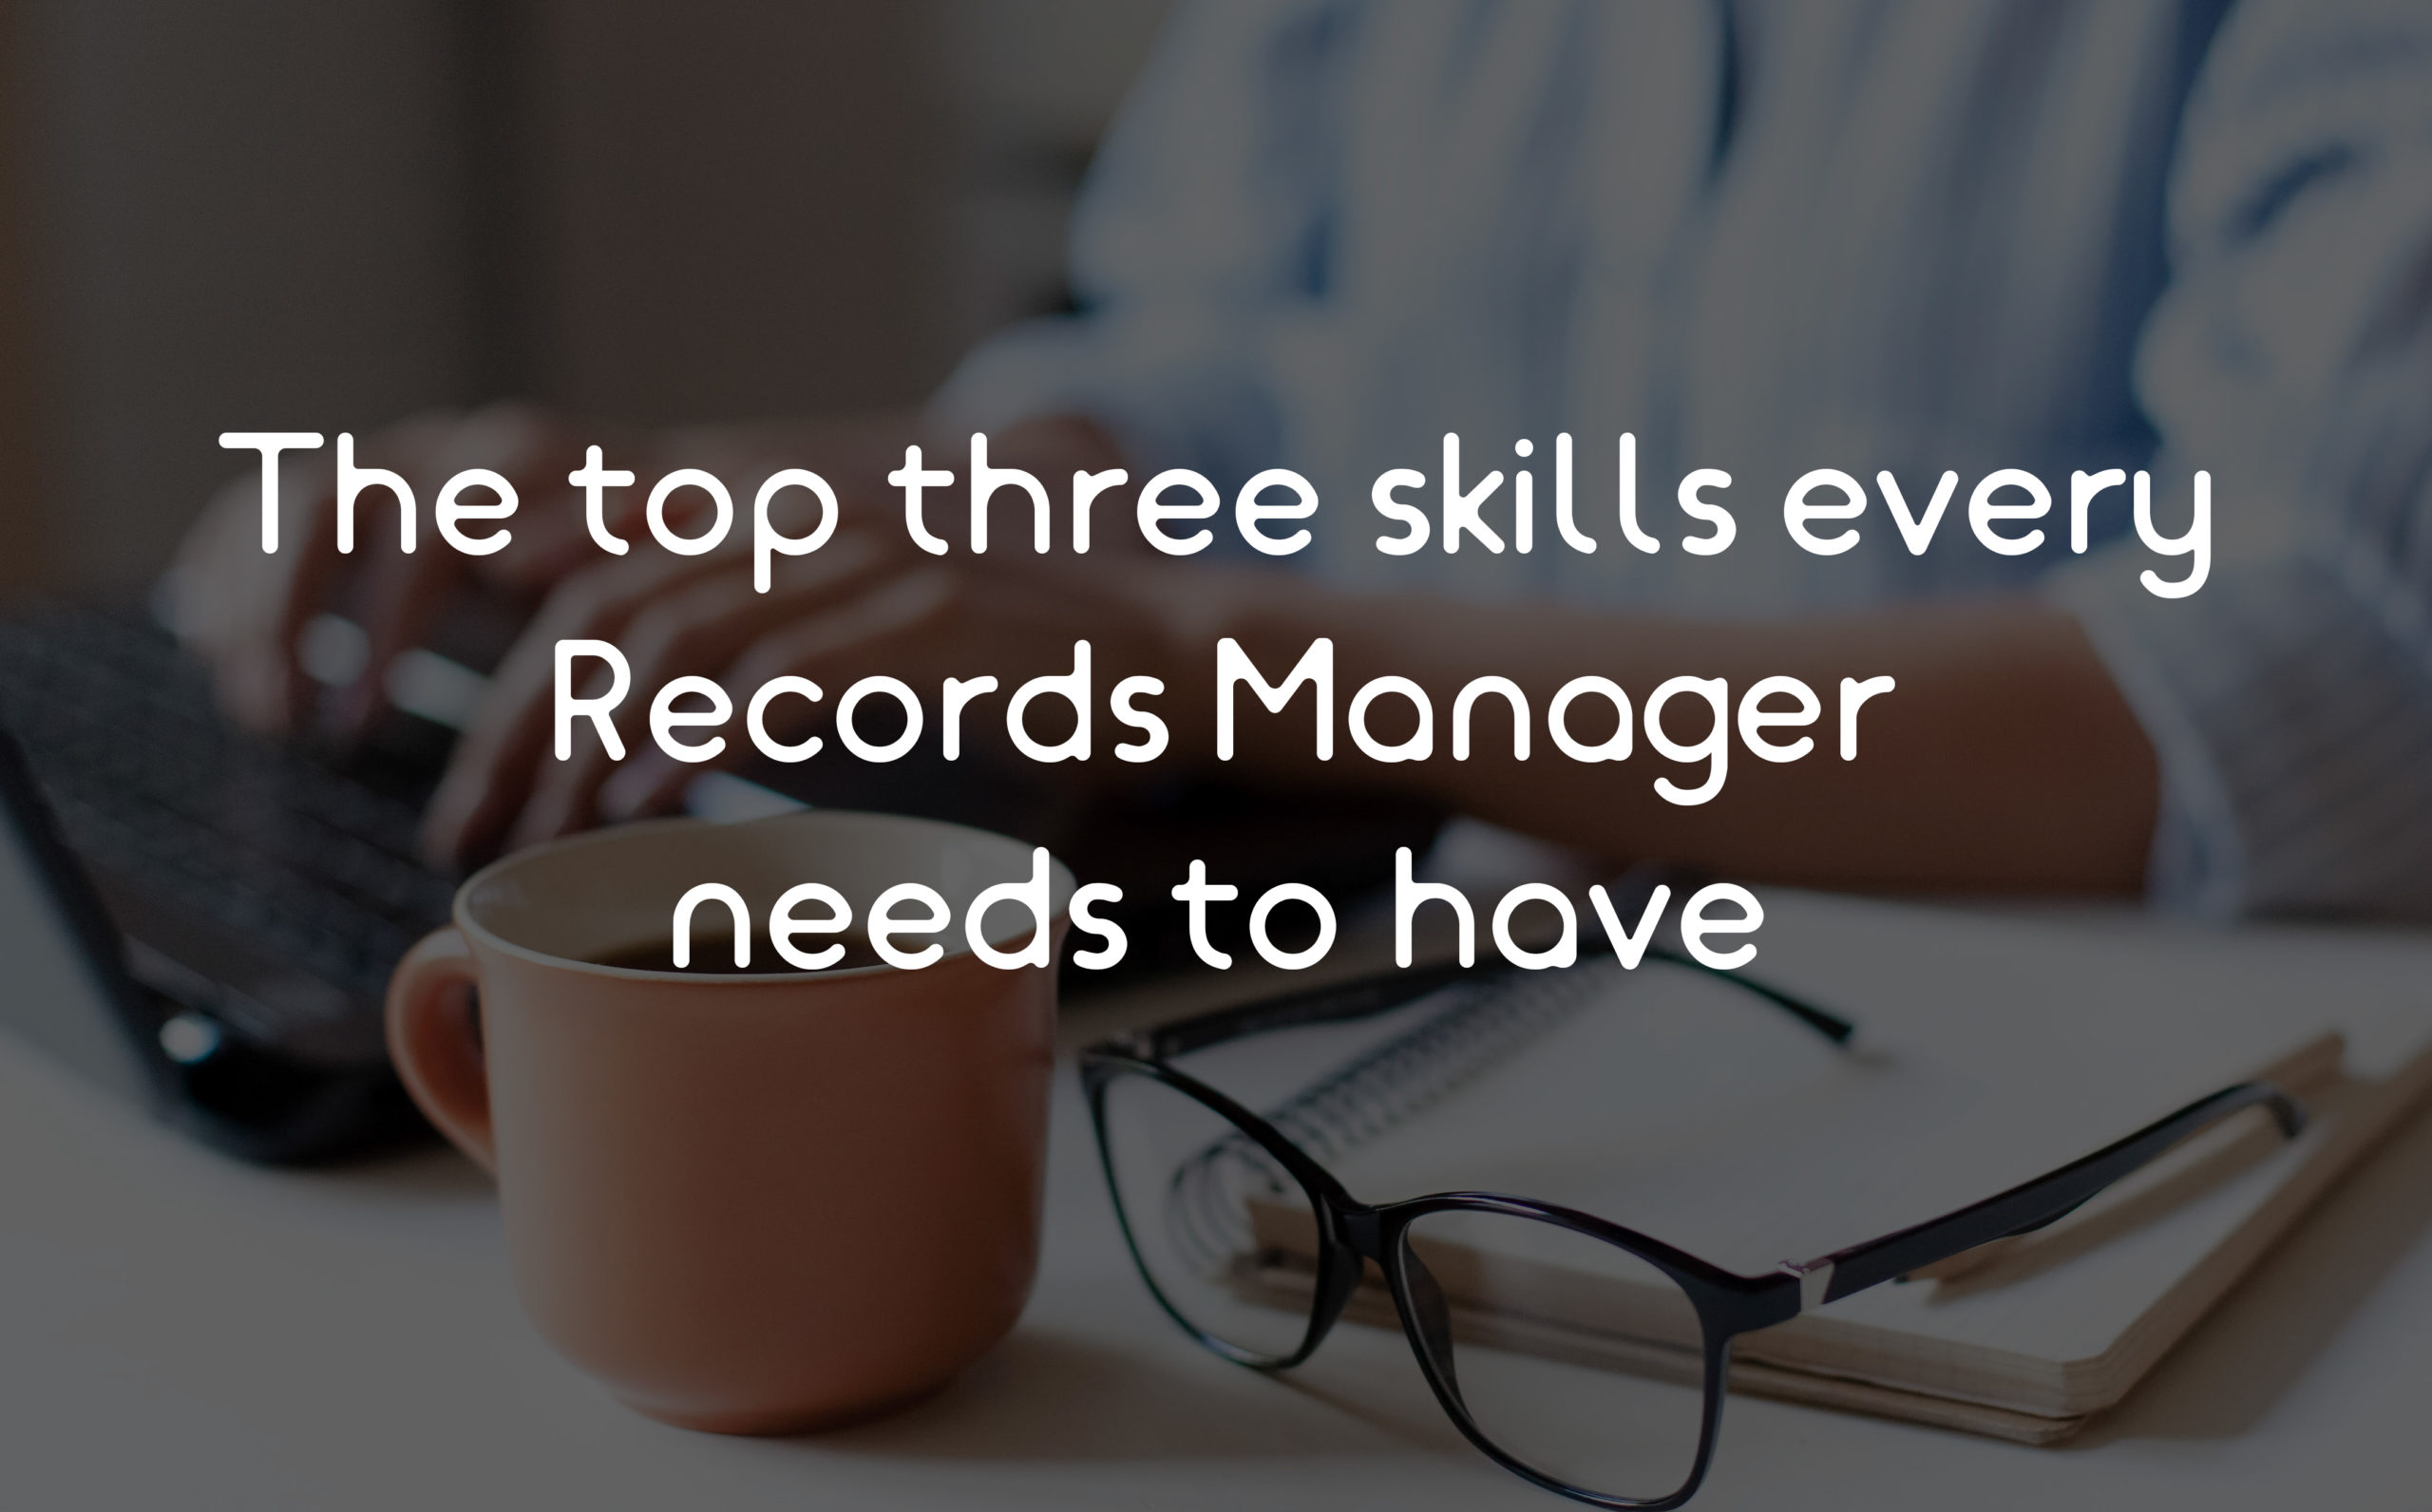 The top three skills every Records Manager needs to have